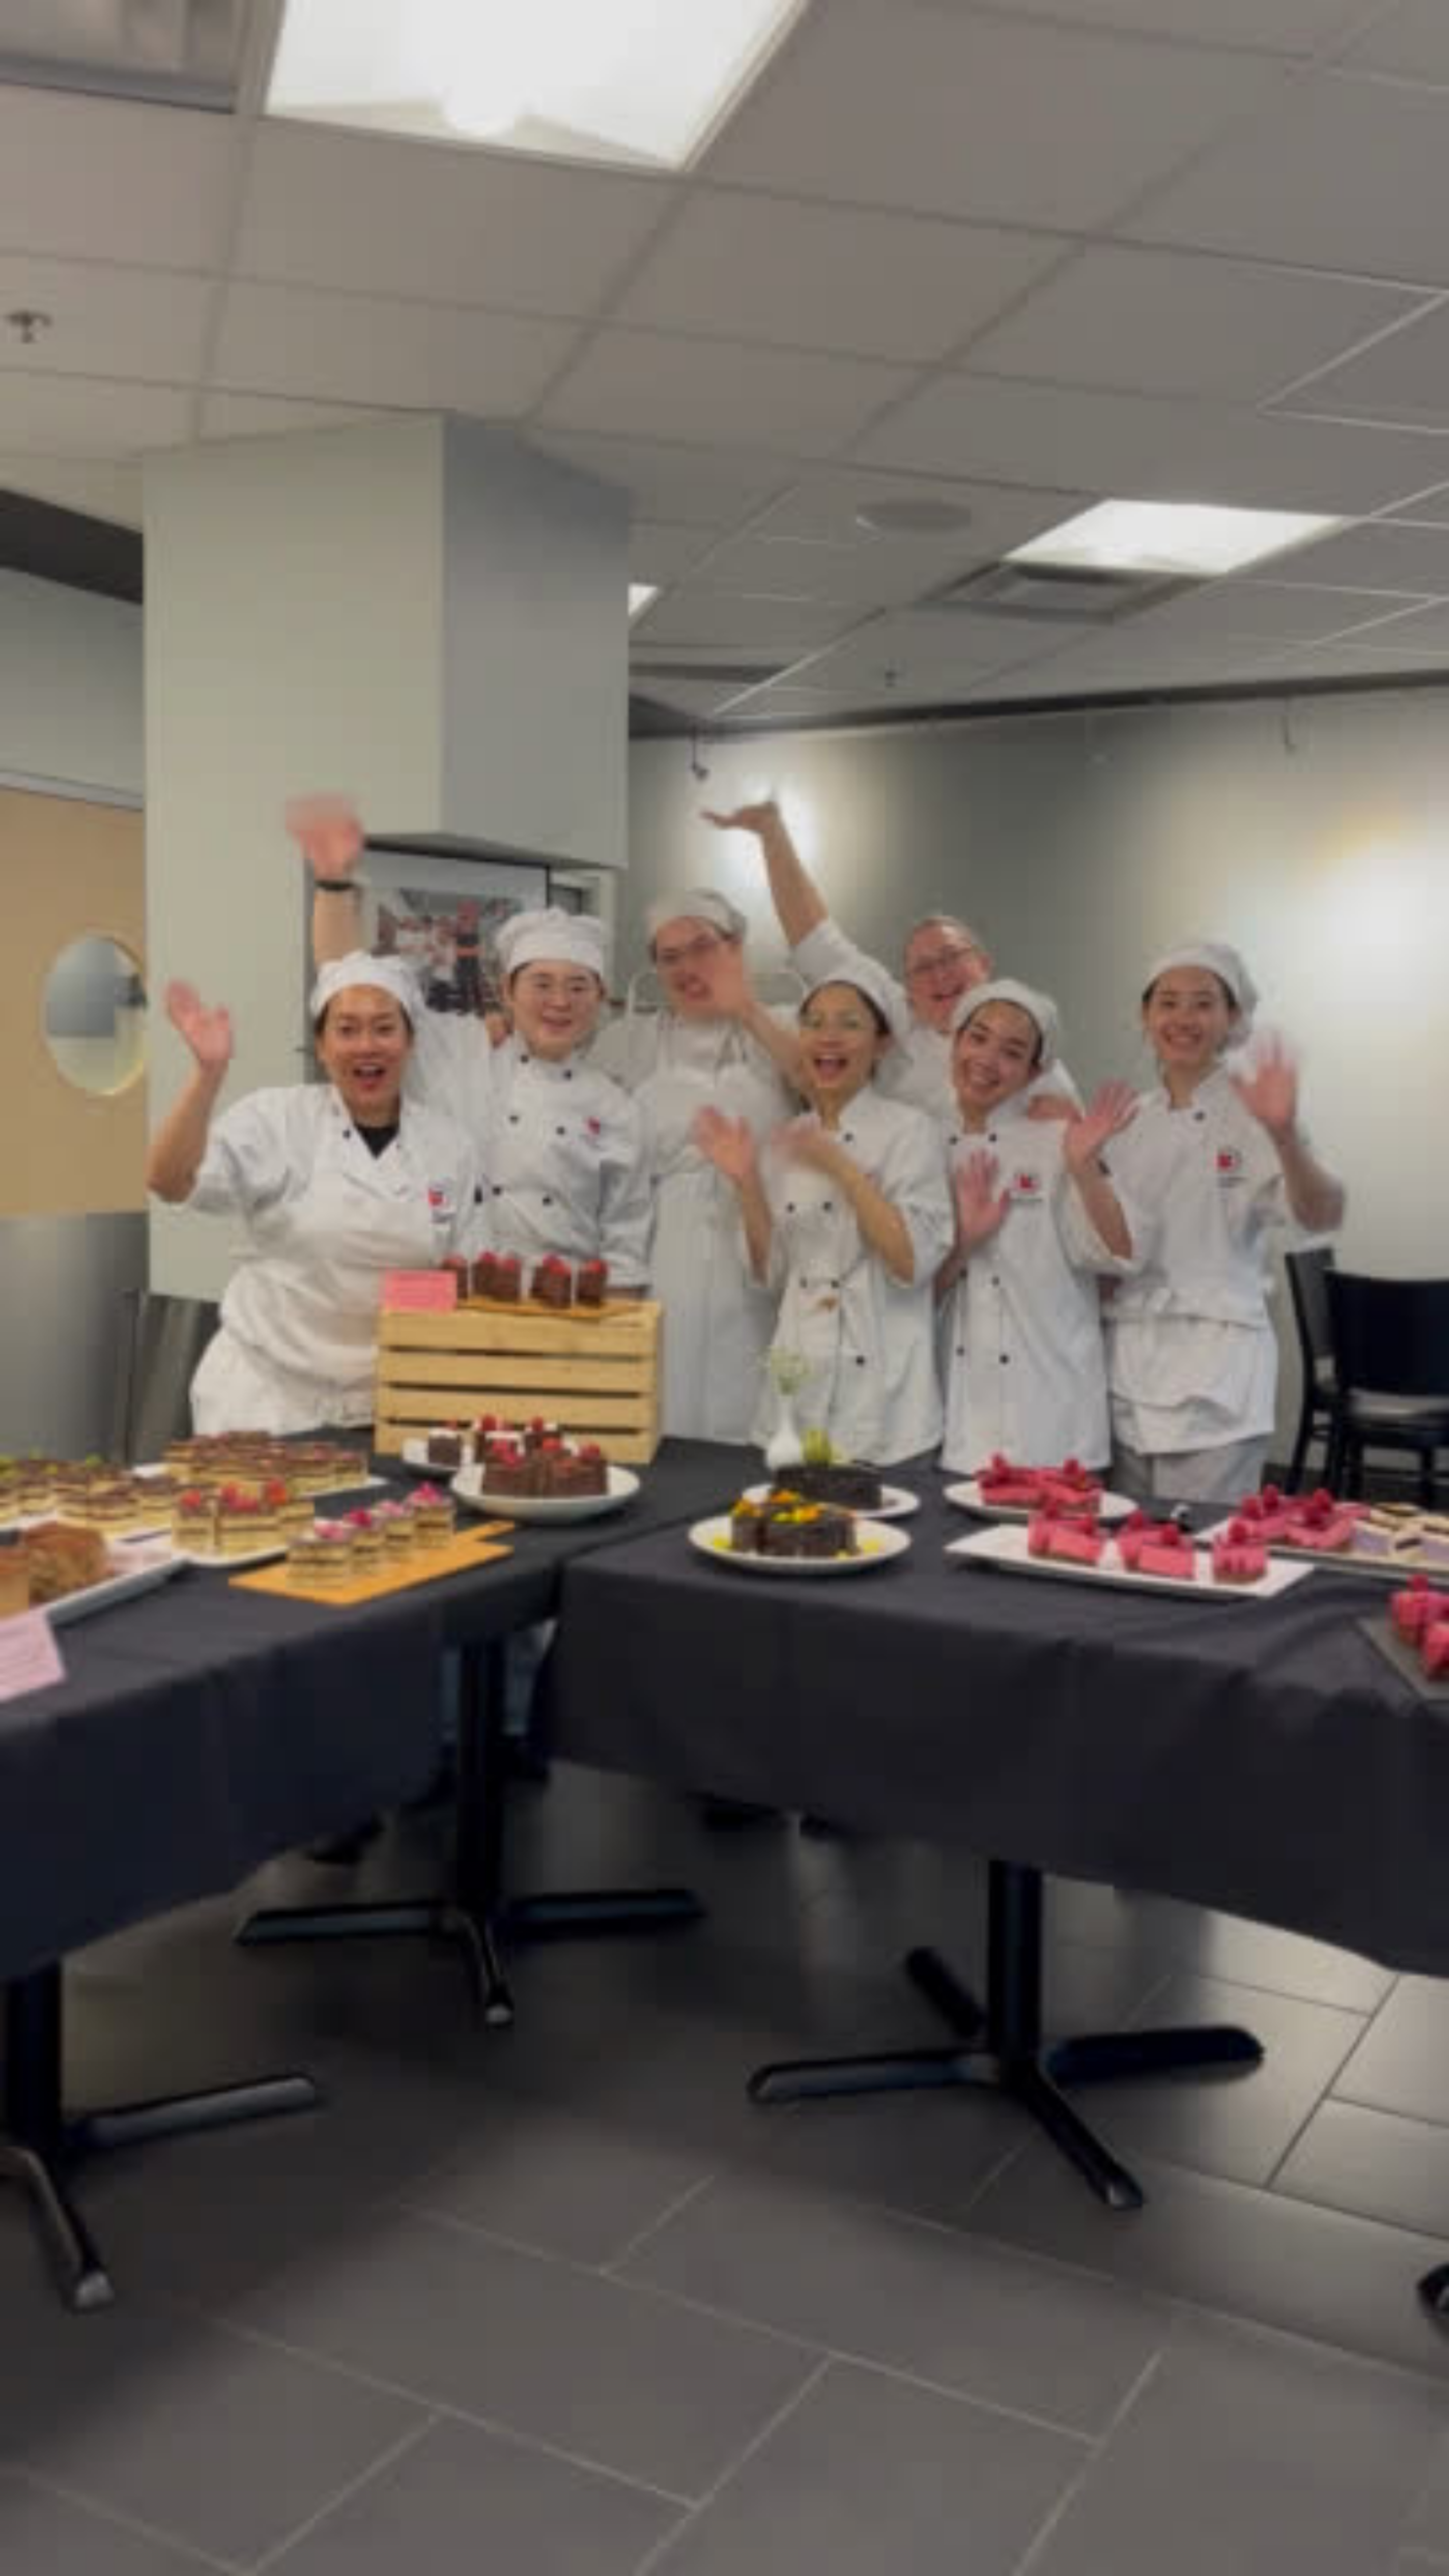 A team of chefs in white uniforms joyfully raise their hands, surrounded by a spread of elegant desserts.